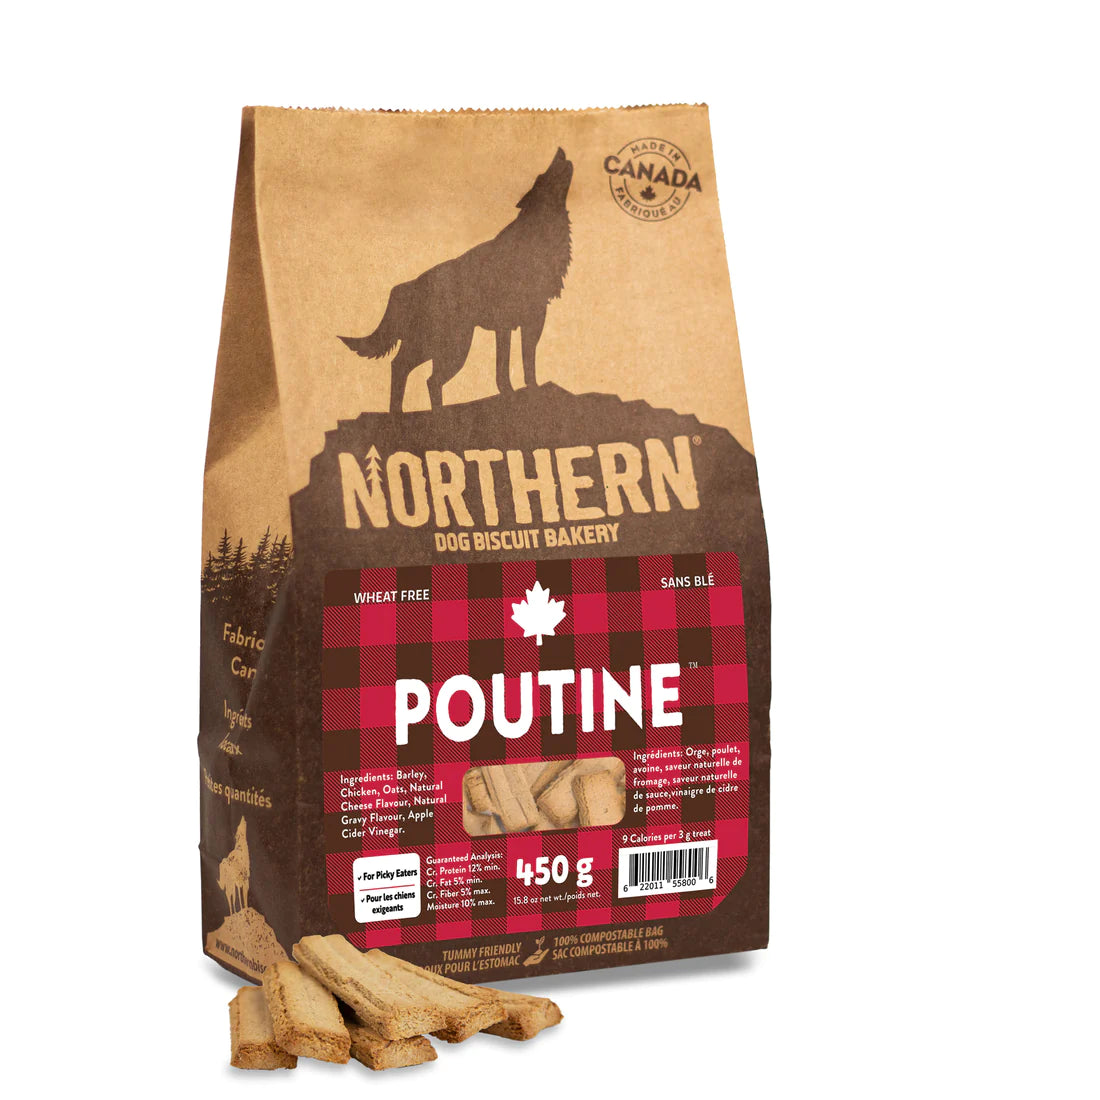 Northern Biscuit Poutine